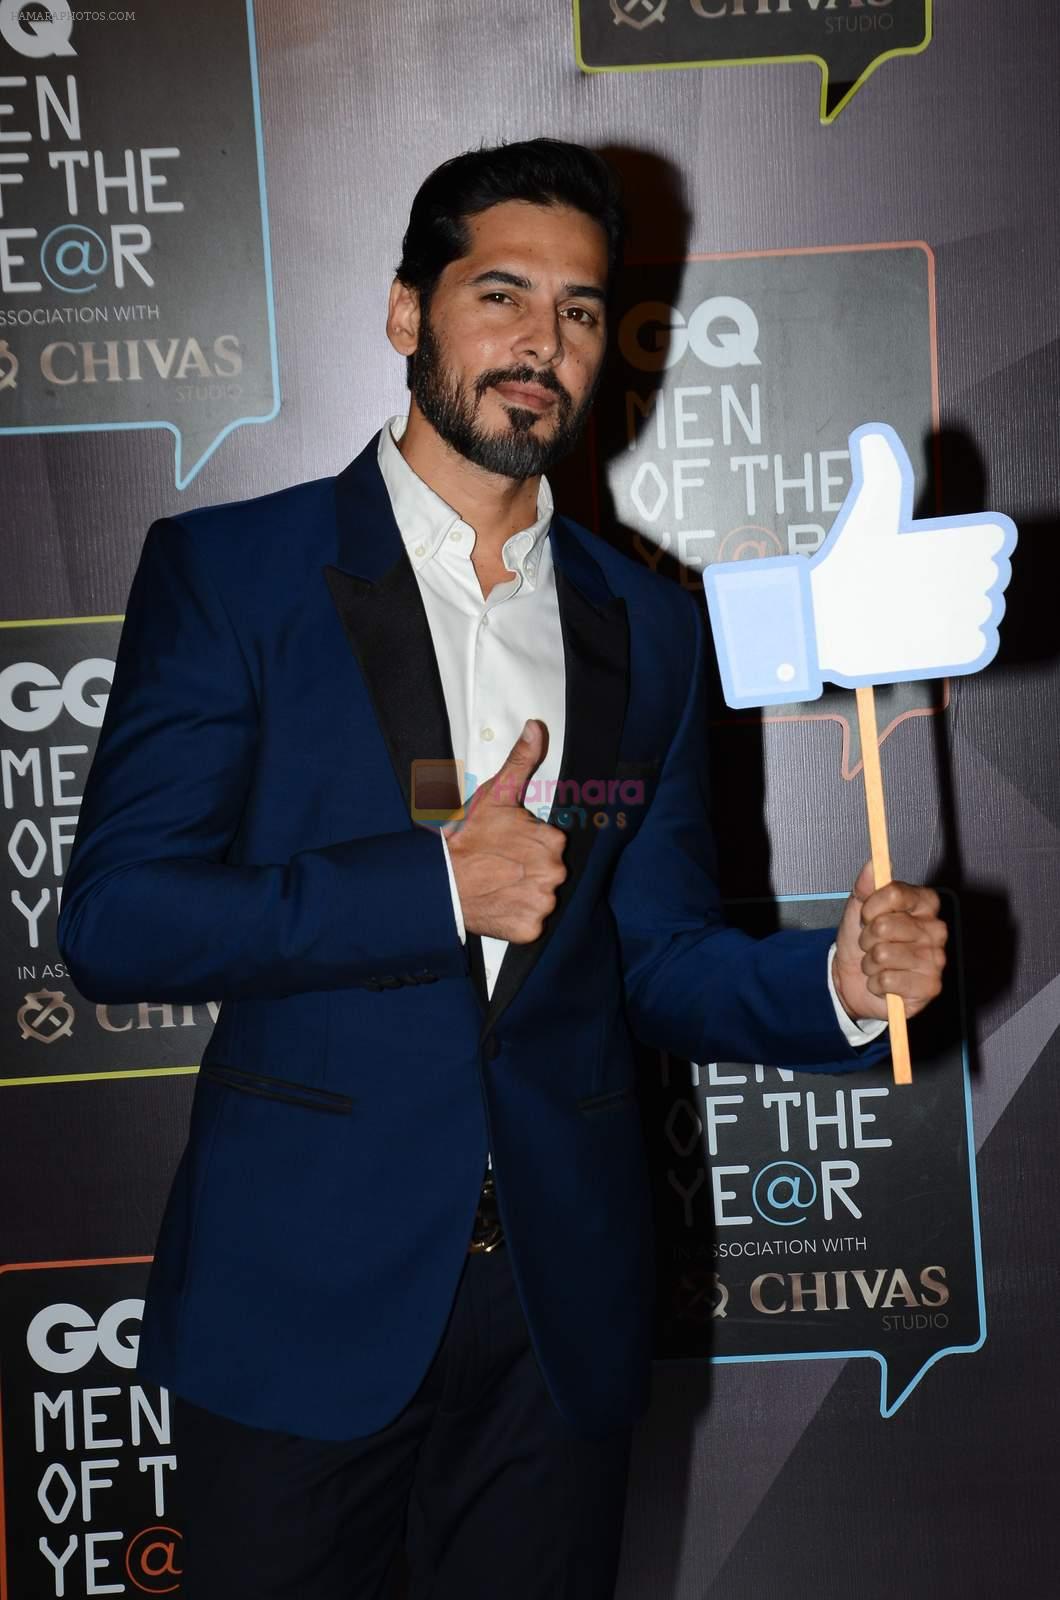 Dino Morea at GQ men of the year 2015 on 26th Sept 2015